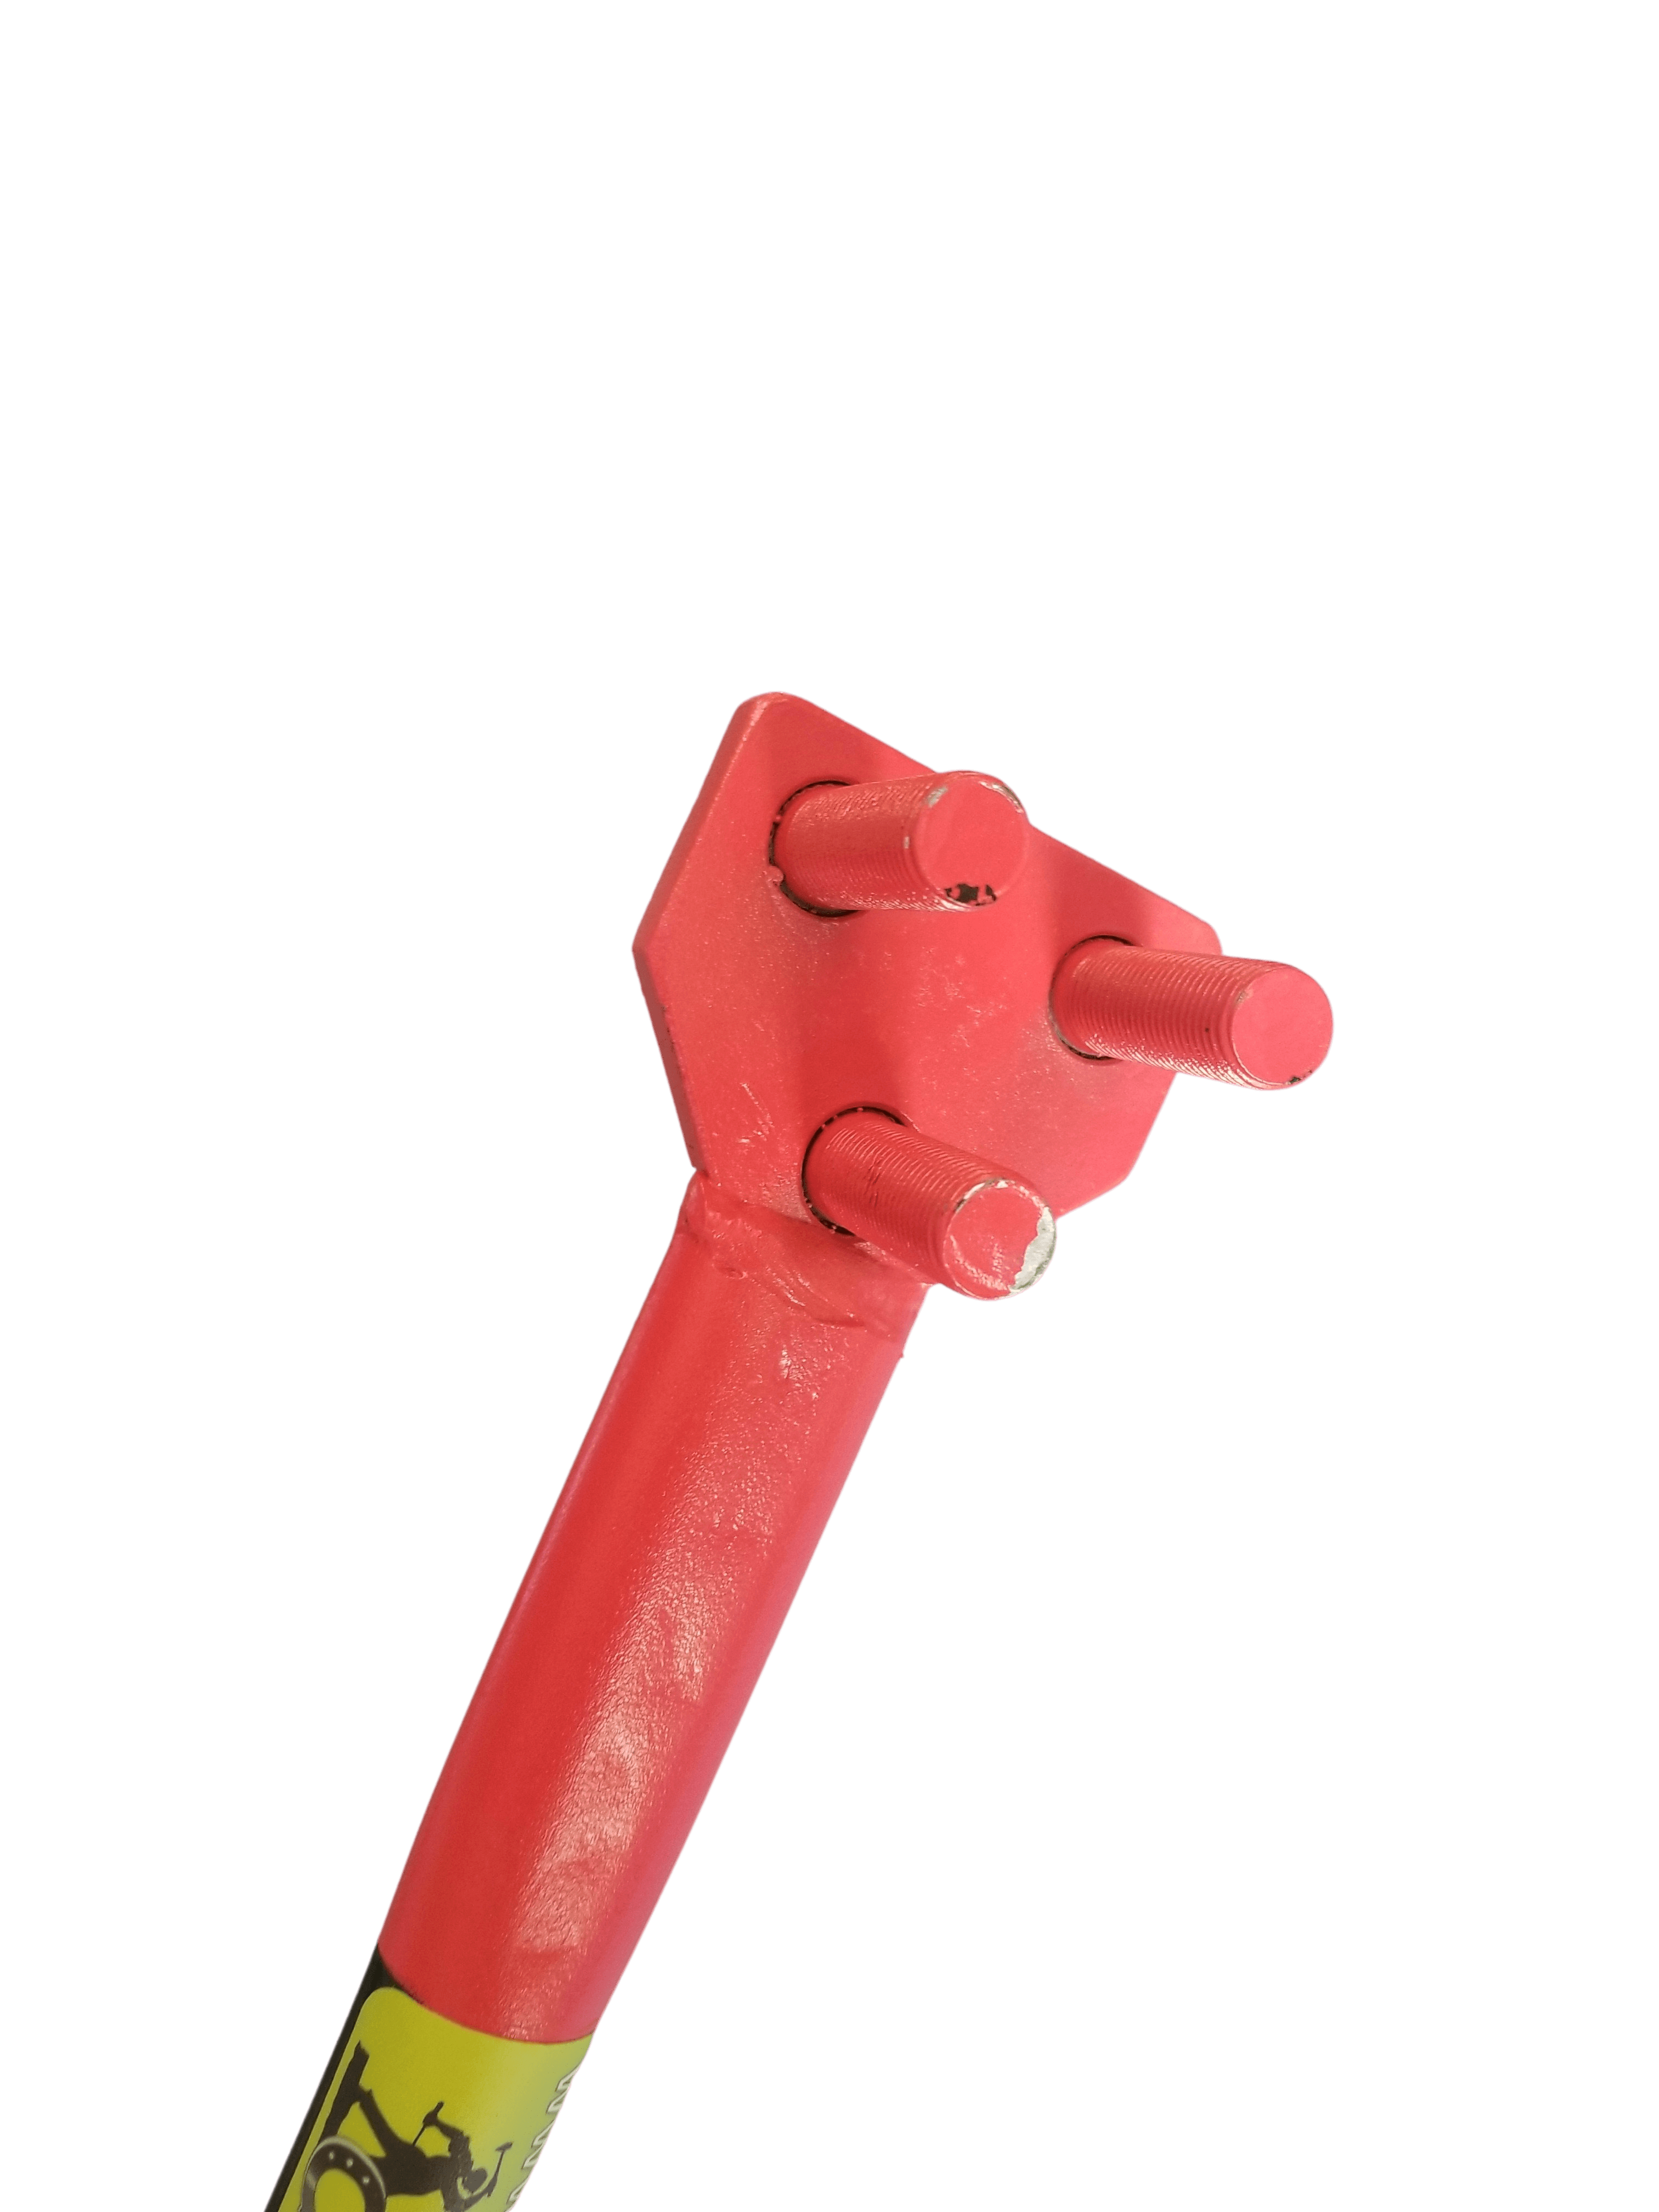 Hickey Bar Rebar Hand Bender manual Hicky 3/8" - 5/8" Type A30 Concrete Tools DC Mach Inc. 